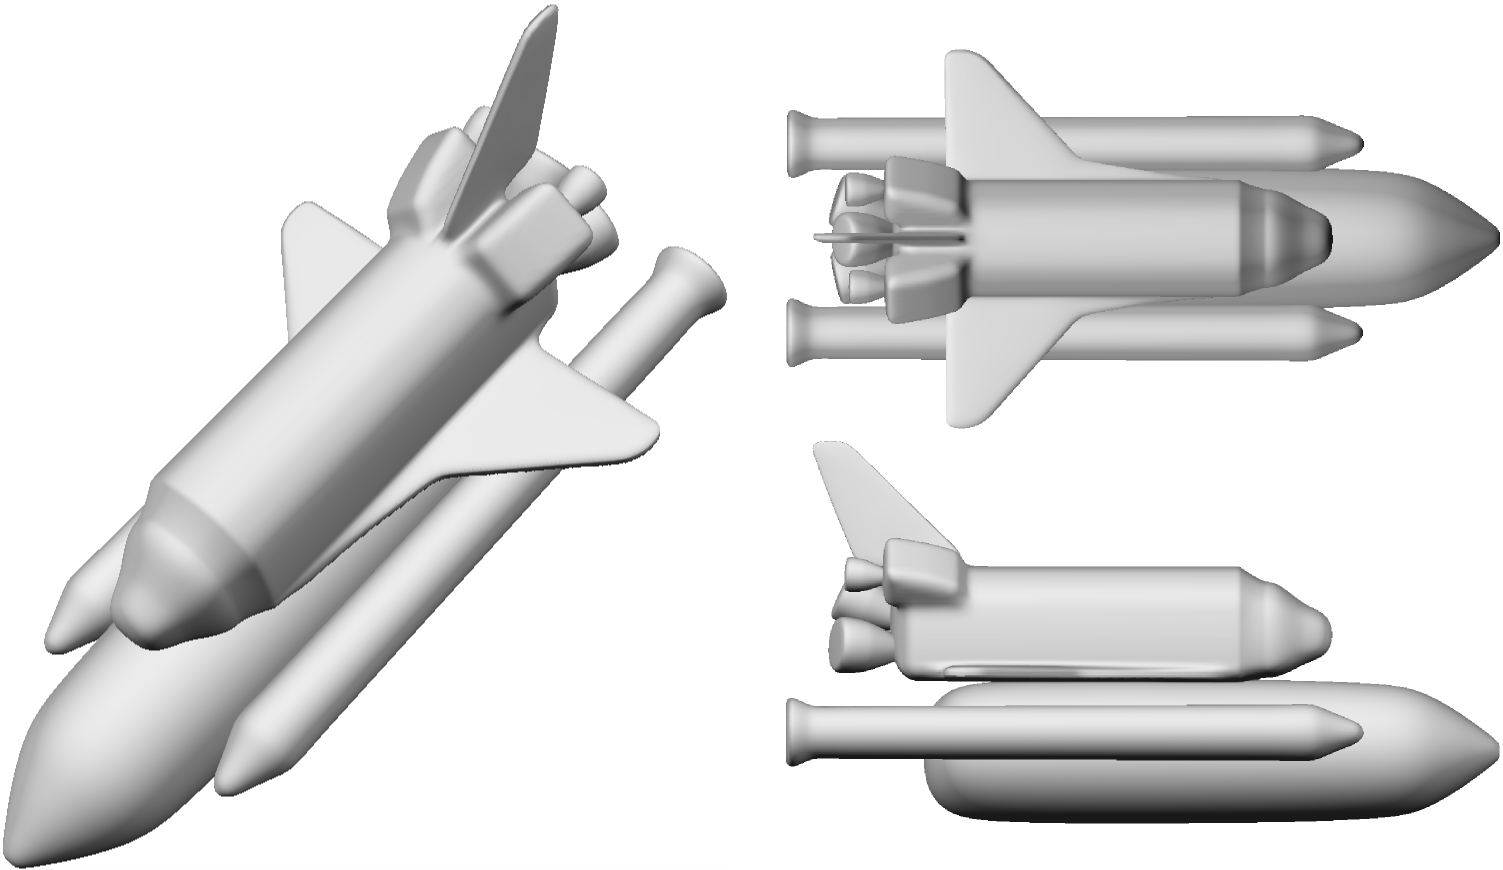  A Space Shuttle modeled with blended implicit sweeps 